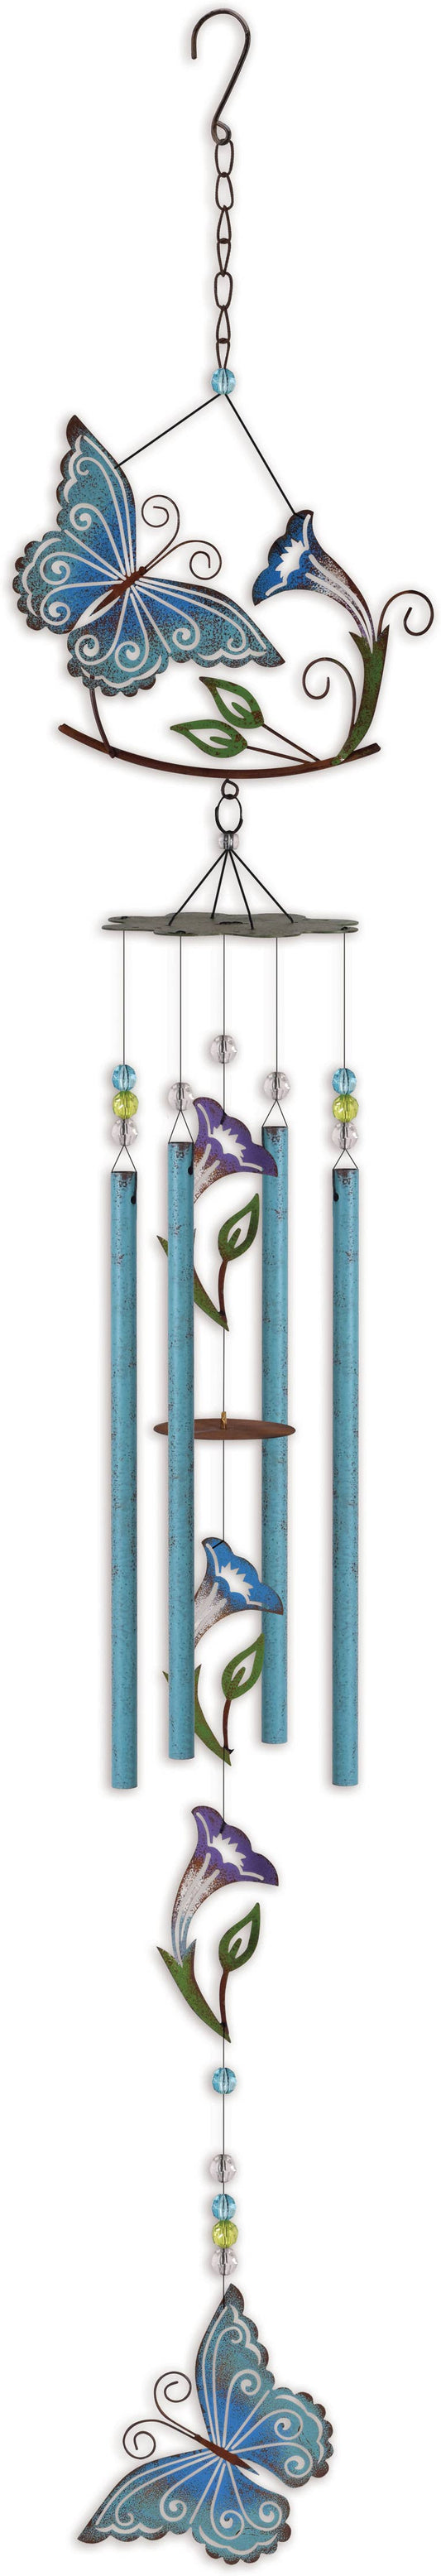 Butterfly and Flower Chime